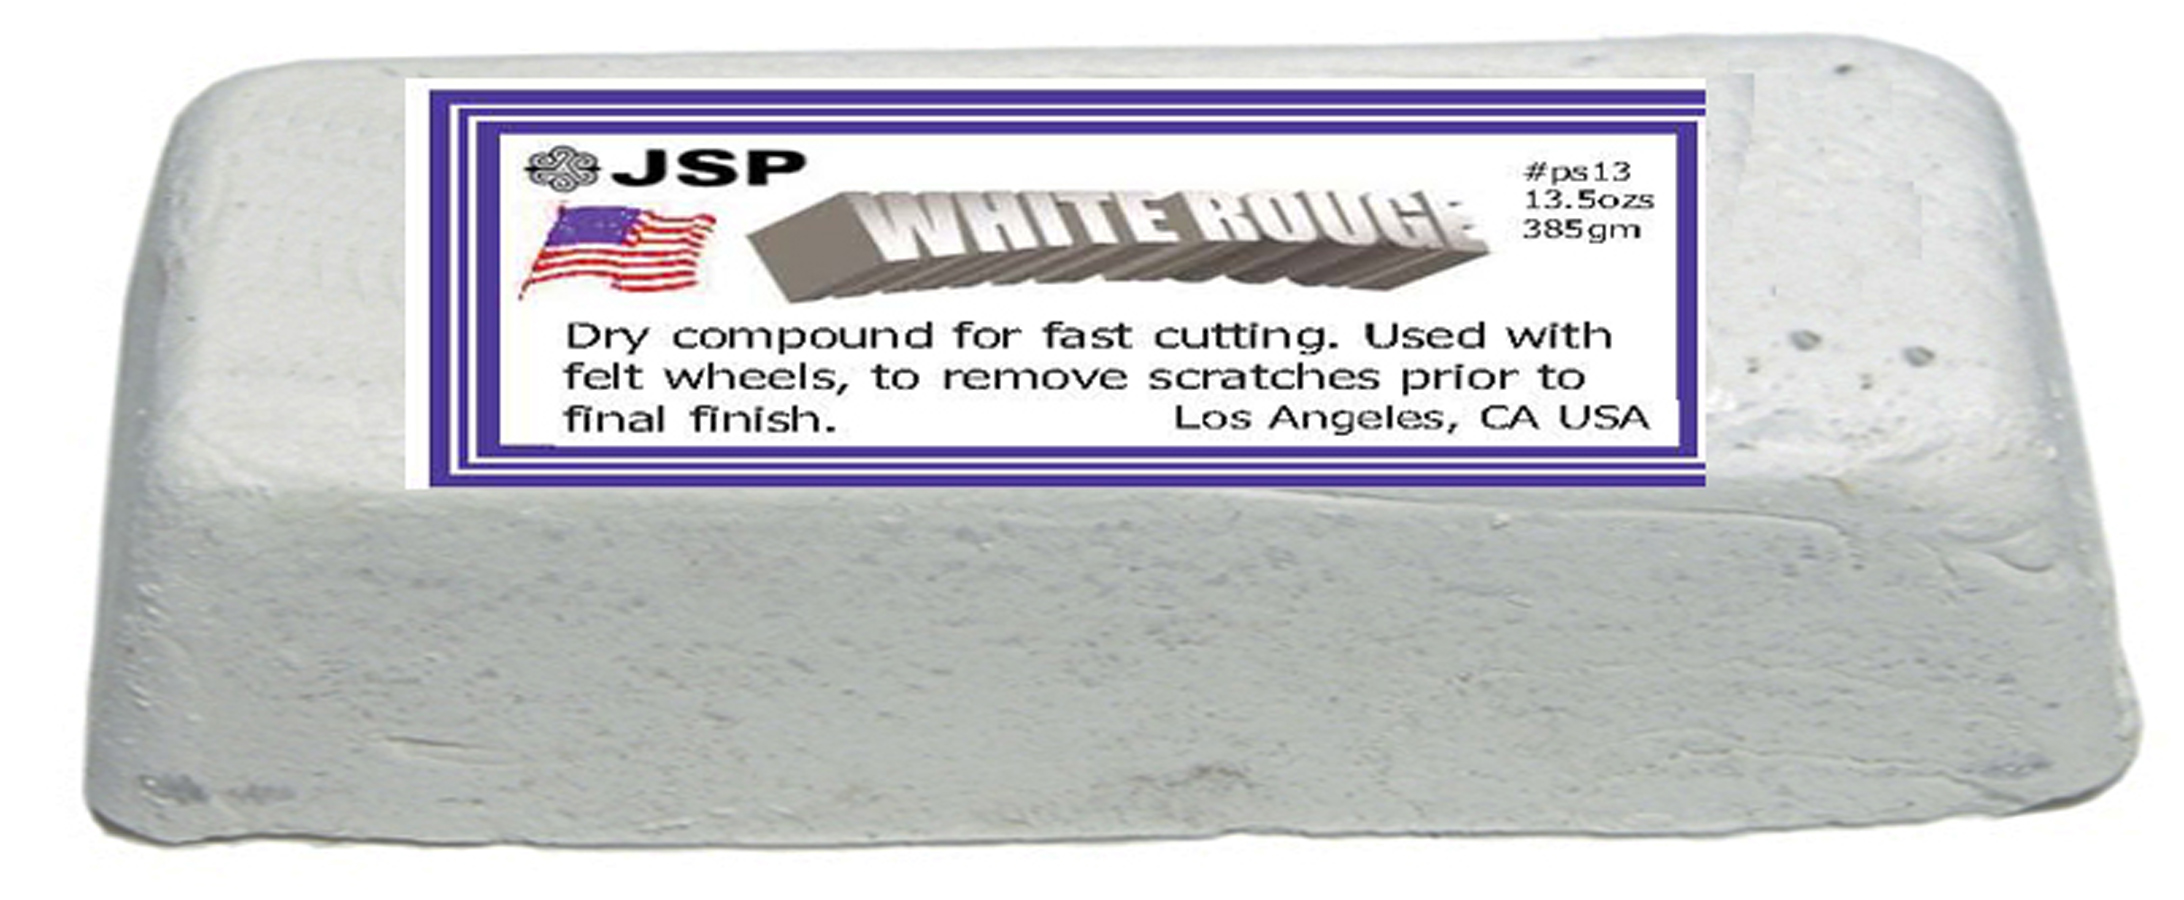 WHITE ROUGE - Click Image to Close